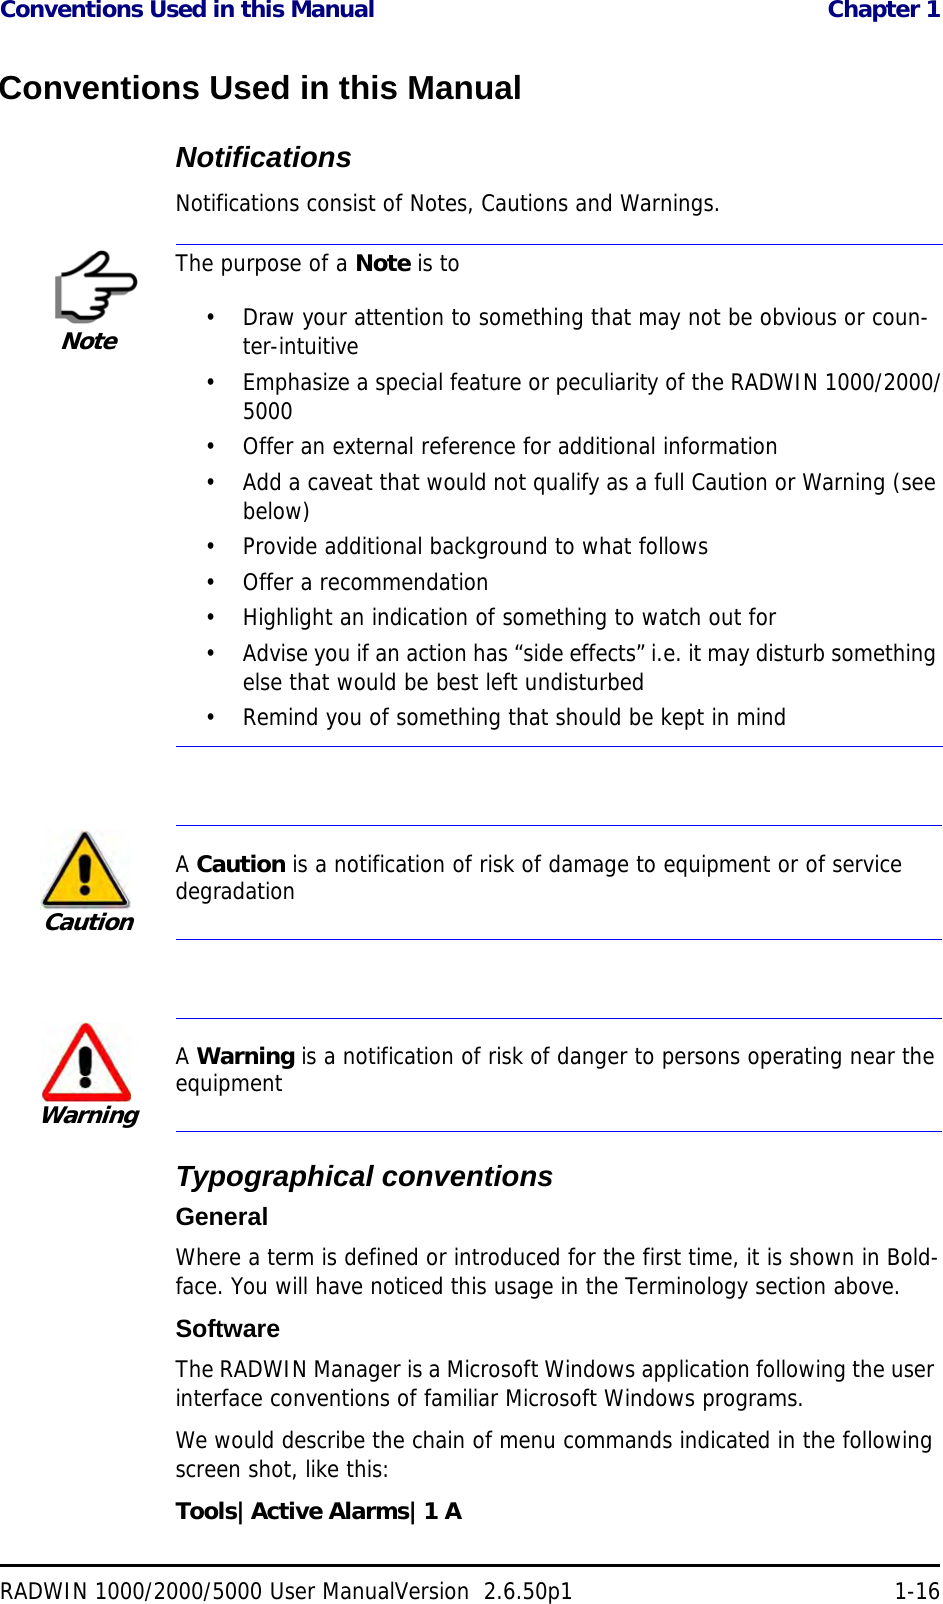 Conventions Used in this Manual  Chapter 1RADWIN 1000/2000/5000 User ManualVersion  2.6.50p1 1-16Conventions Used in this ManualNotificationsNotifications consist of Notes, Cautions and Warnings.Typographical conventionsGeneralWhere a term is defined or introduced for the first time, it is shown in Bold-face. You will have noticed this usage in the Terminology section above.SoftwareThe RADWIN Manager is a Microsoft Windows application following the user interface conventions of familiar Microsoft Windows programs.We would describe the chain of menu commands indicated in the following screen shot, like this:Tools|Active Alarms|1 ANoteThe purpose of a Note is to• Draw your attention to something that may not be obvious or coun-ter-intuitive• Emphasize a special feature or peculiarity of the RADWIN 1000/2000/5000• Offer an external reference for additional information• Add a caveat that would not qualify as a full Caution or Warning (see below)• Provide additional background to what follows• Offer a recommendation• Highlight an indication of something to watch out for• Advise you if an action has “side effects” i.e. it may disturb something else that would be best left undisturbed• Remind you of something that should be kept in mindCautionA Caution is a notification of risk of damage to equipment or of service degradationWarningA Warning is a notification of risk of danger to persons operating near the equipment